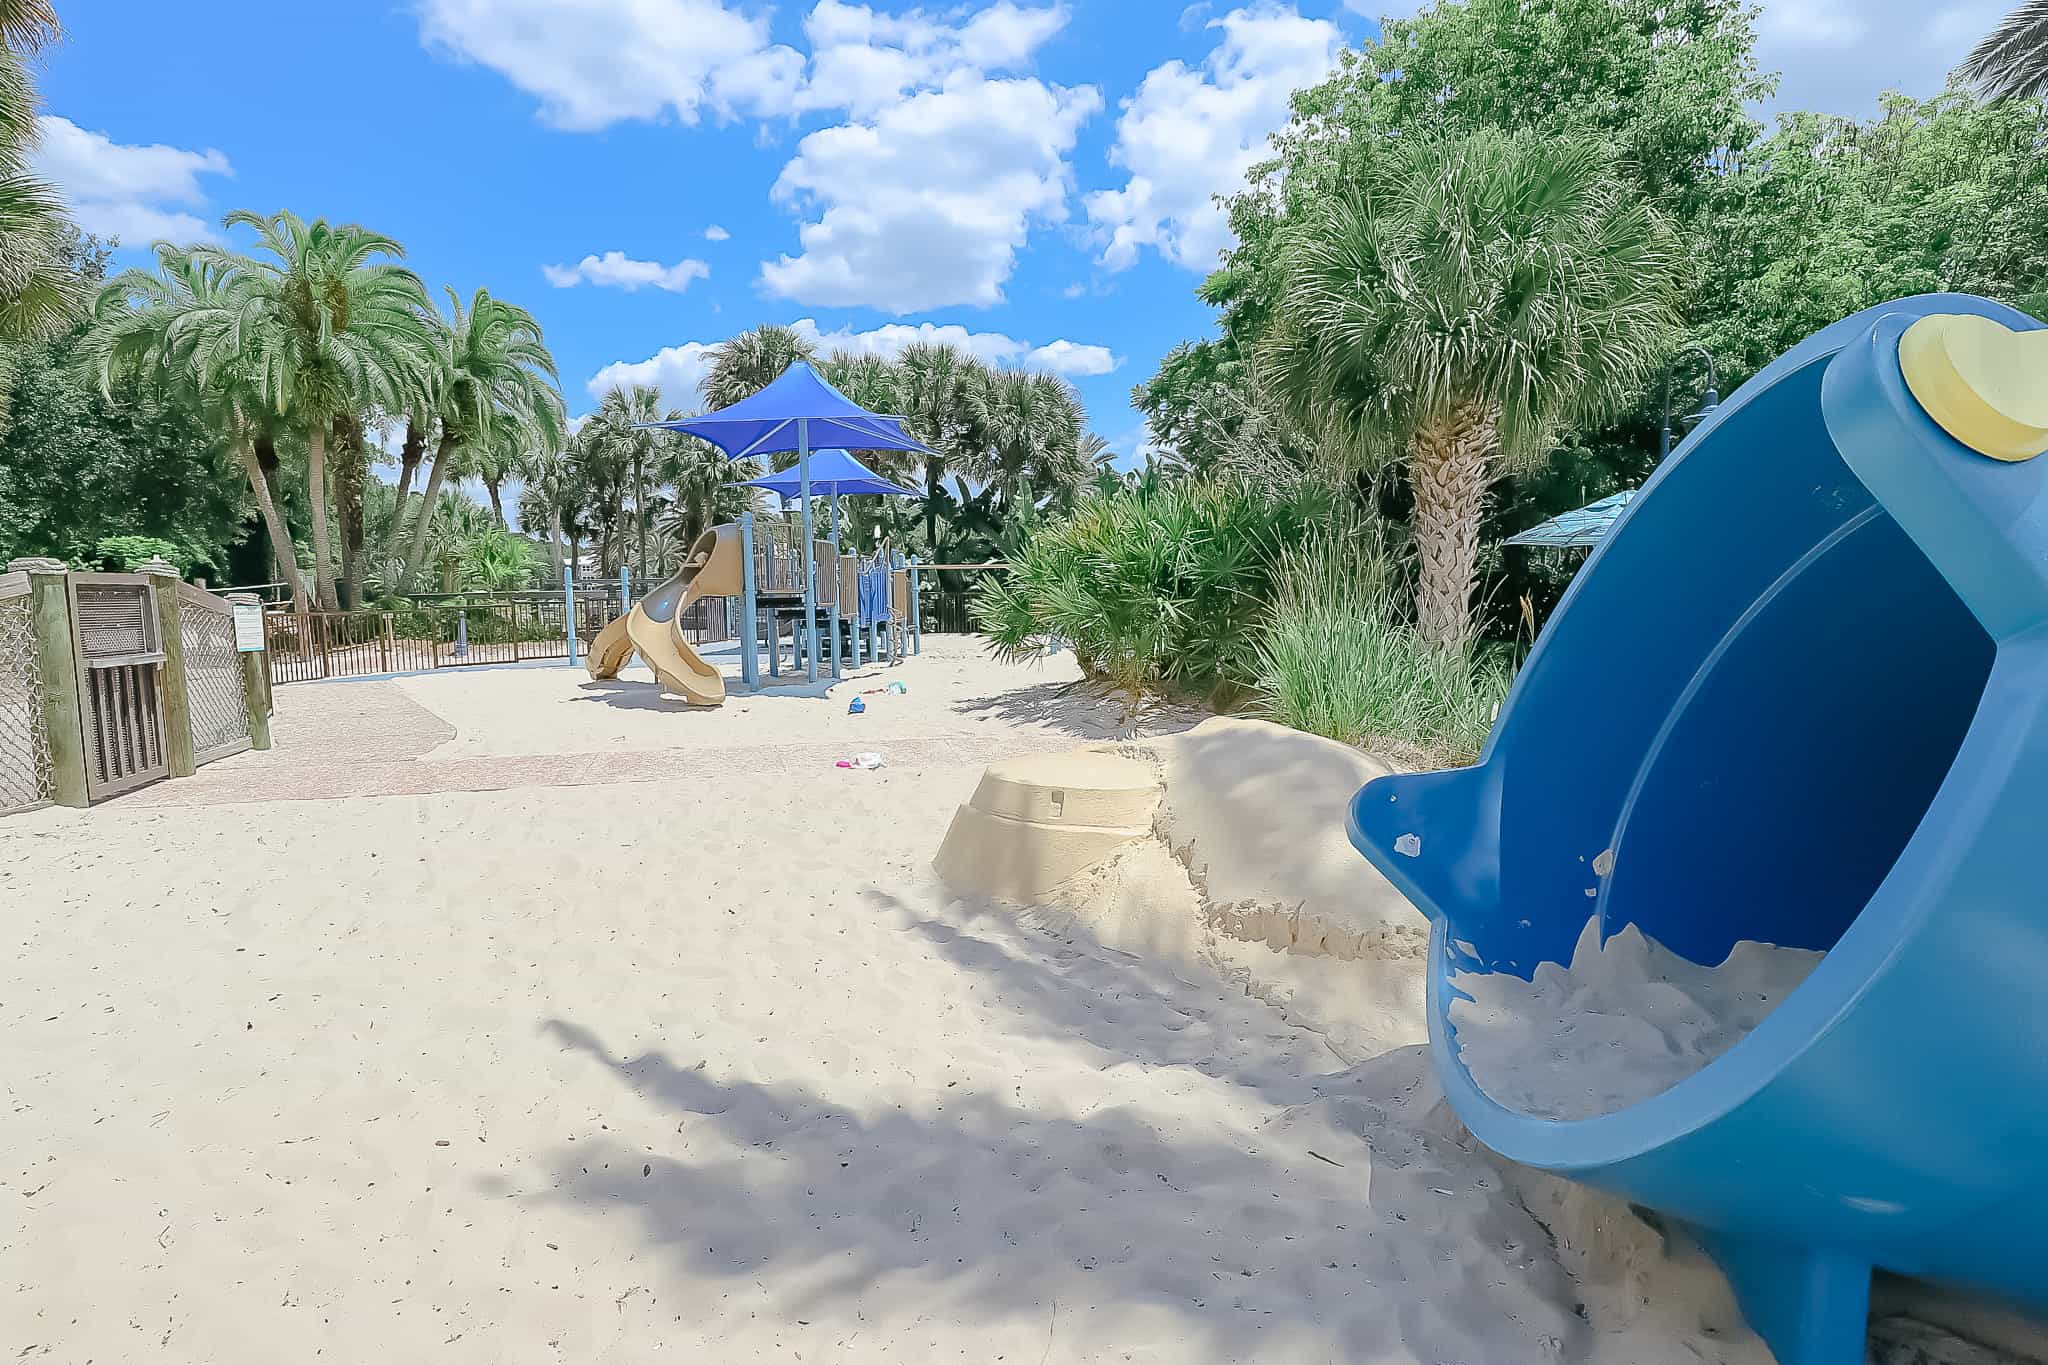 giant sand pail and sand play area at Disney's Old Key West